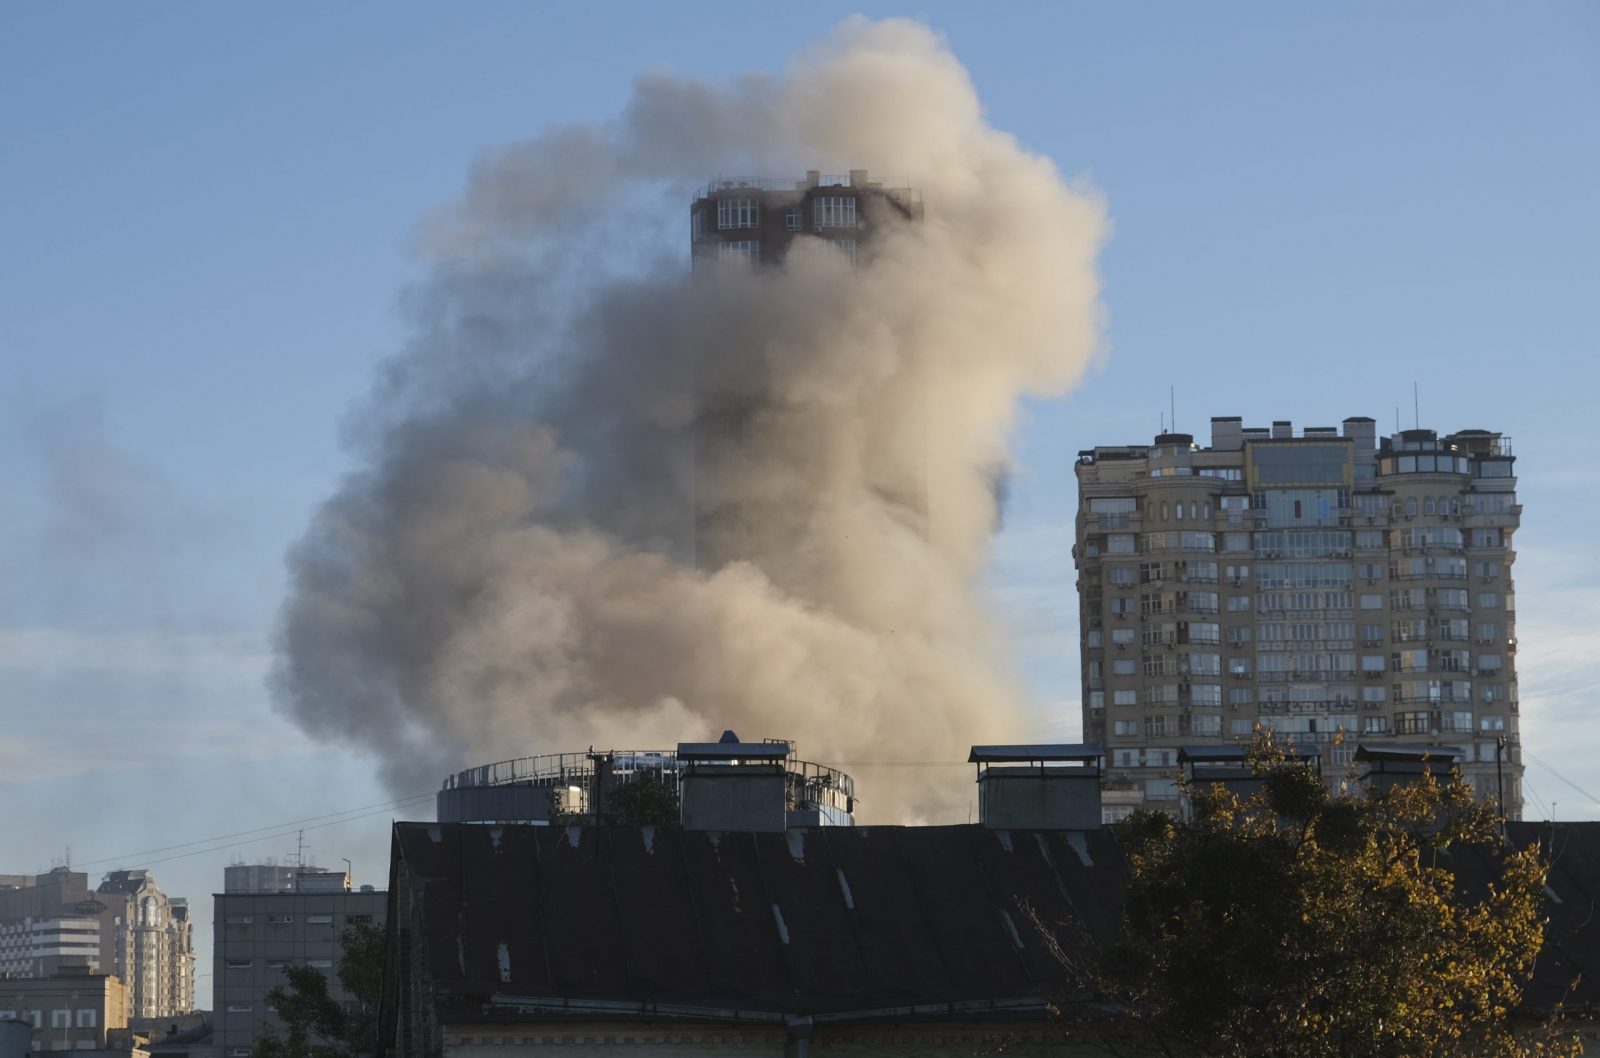 epa10248581 Smoke billows from a building hit by a drone attack in downtown Kyiv (Kiev), Ukraine, 17 October 2022, amid the Russian invasion. Several residential buildings were damaged as a result of attacks by 'kamikaze drones' targeting the Ukrainian capital, Kyiv Mayor Vitali Klitschko said on telegram. At least one person has died, he added. Russian troops on 24 February entered Ukrainian territory, starting a conflict that has provoked destruction and a humanitarian crisis.  EPA/VADYM SARAKHAN